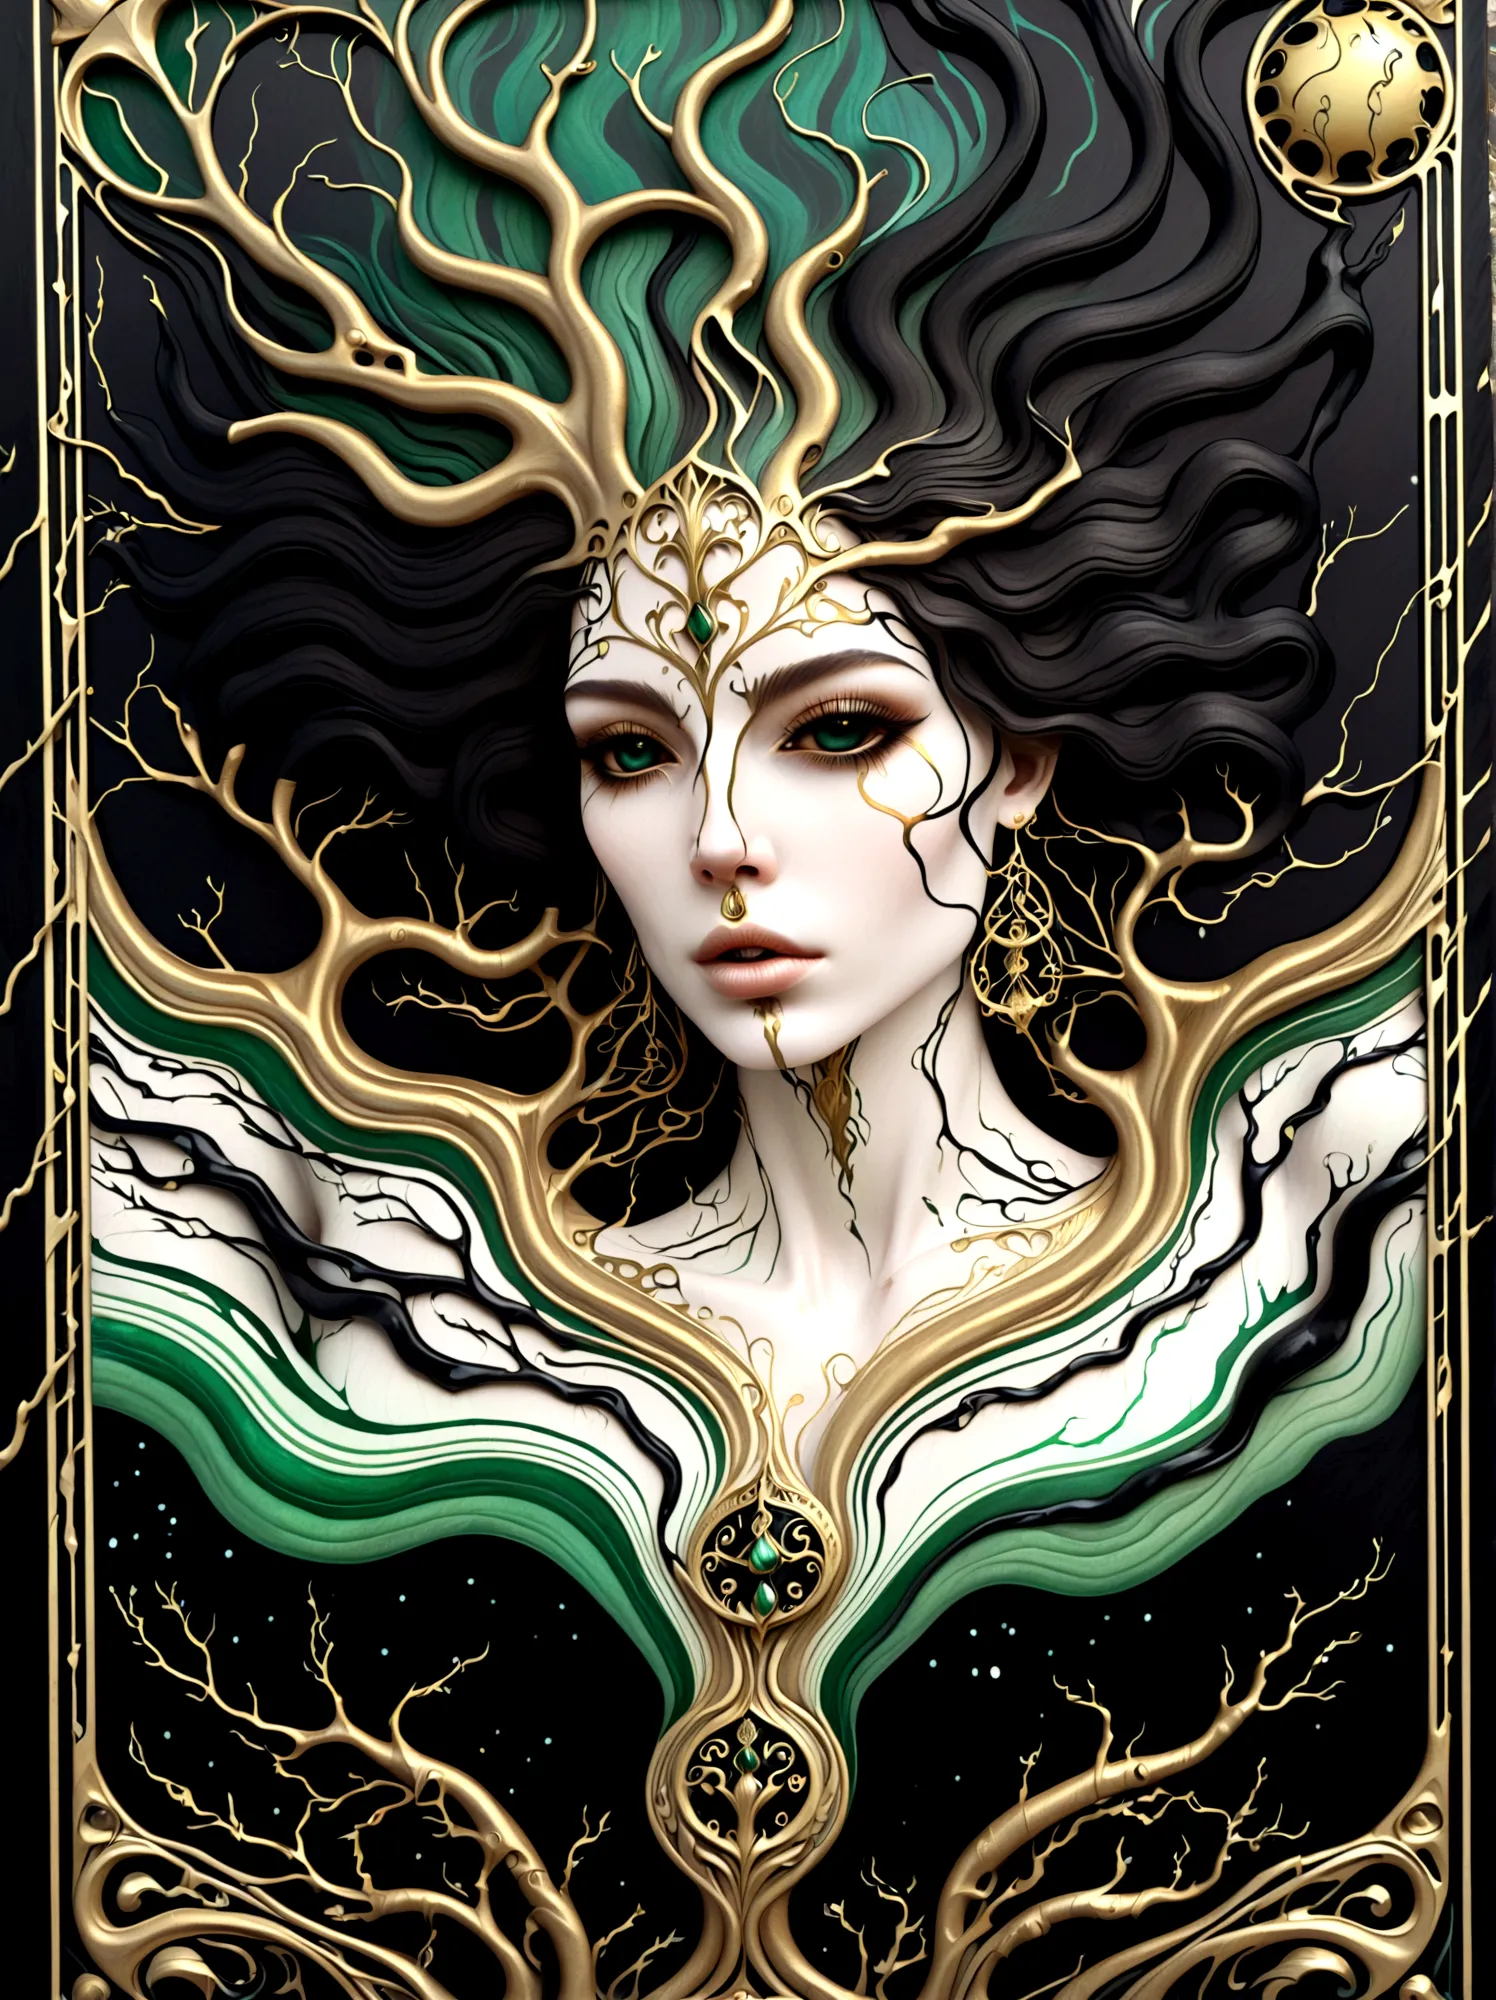 a beautiful portrait of a woman with the tree of life flowing from her head in an abstract marble texture in a tarot style frame...